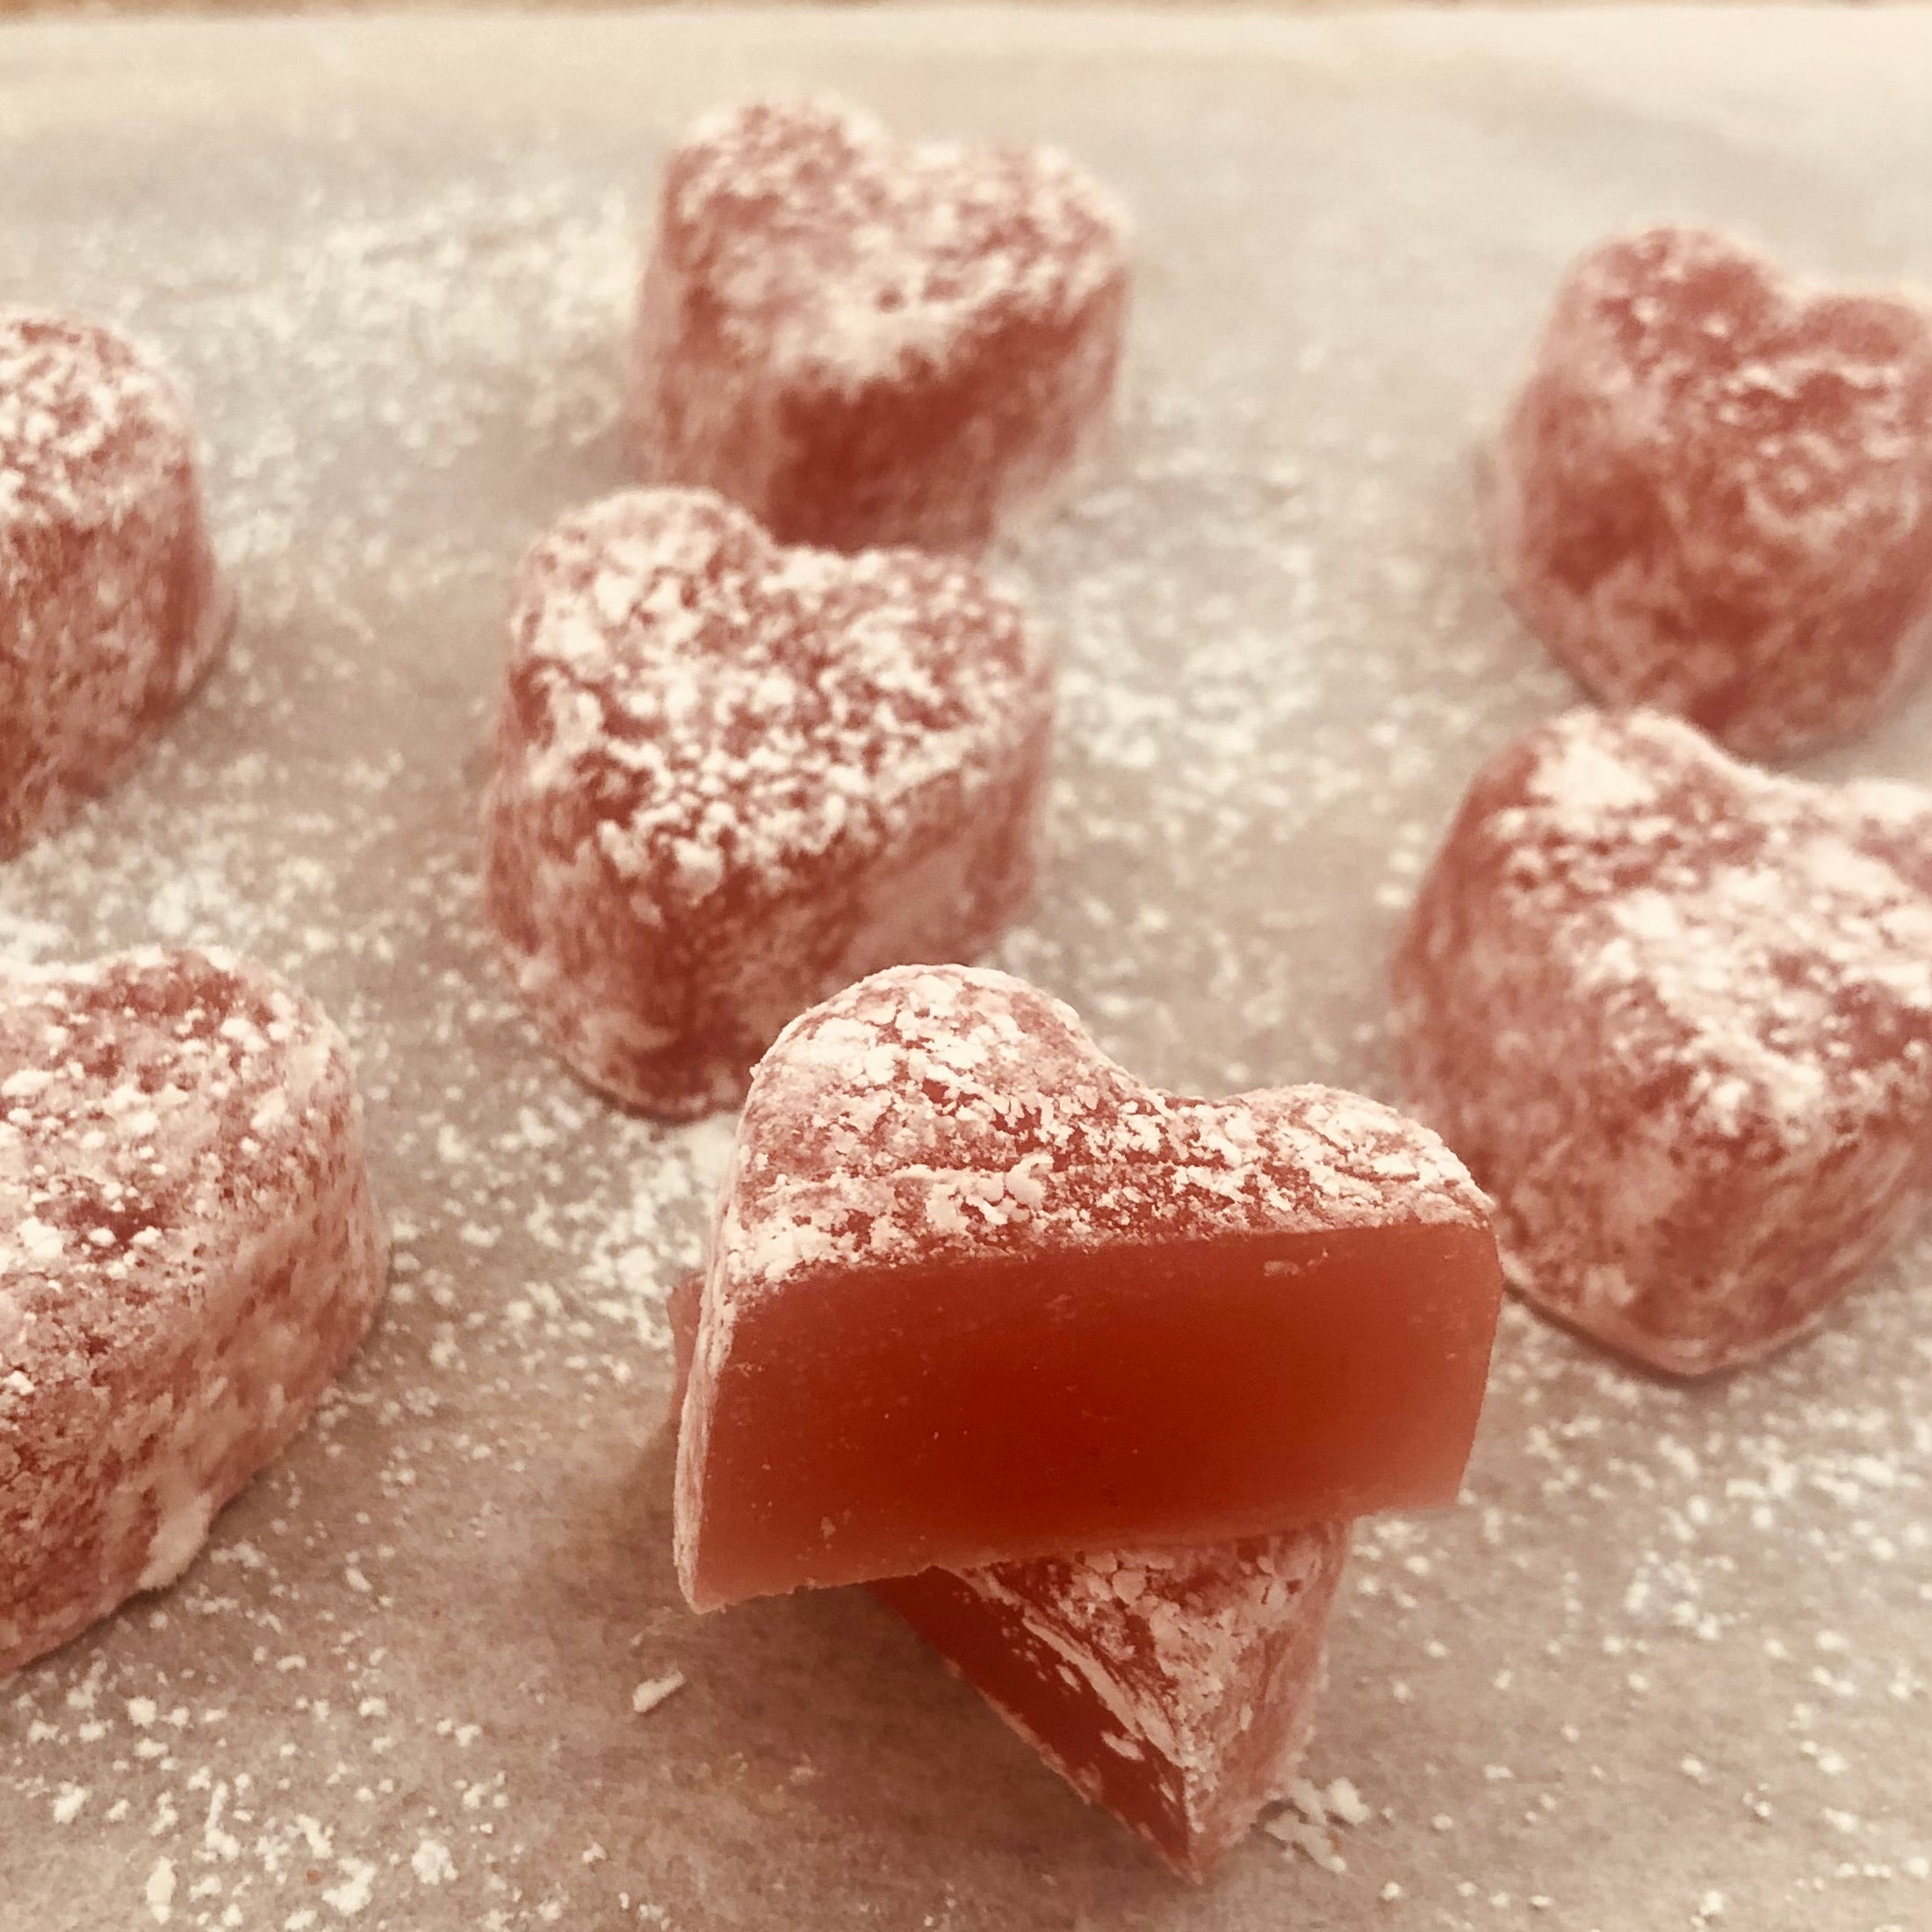 Rose Turkish Delight with Dusting Bag 275g